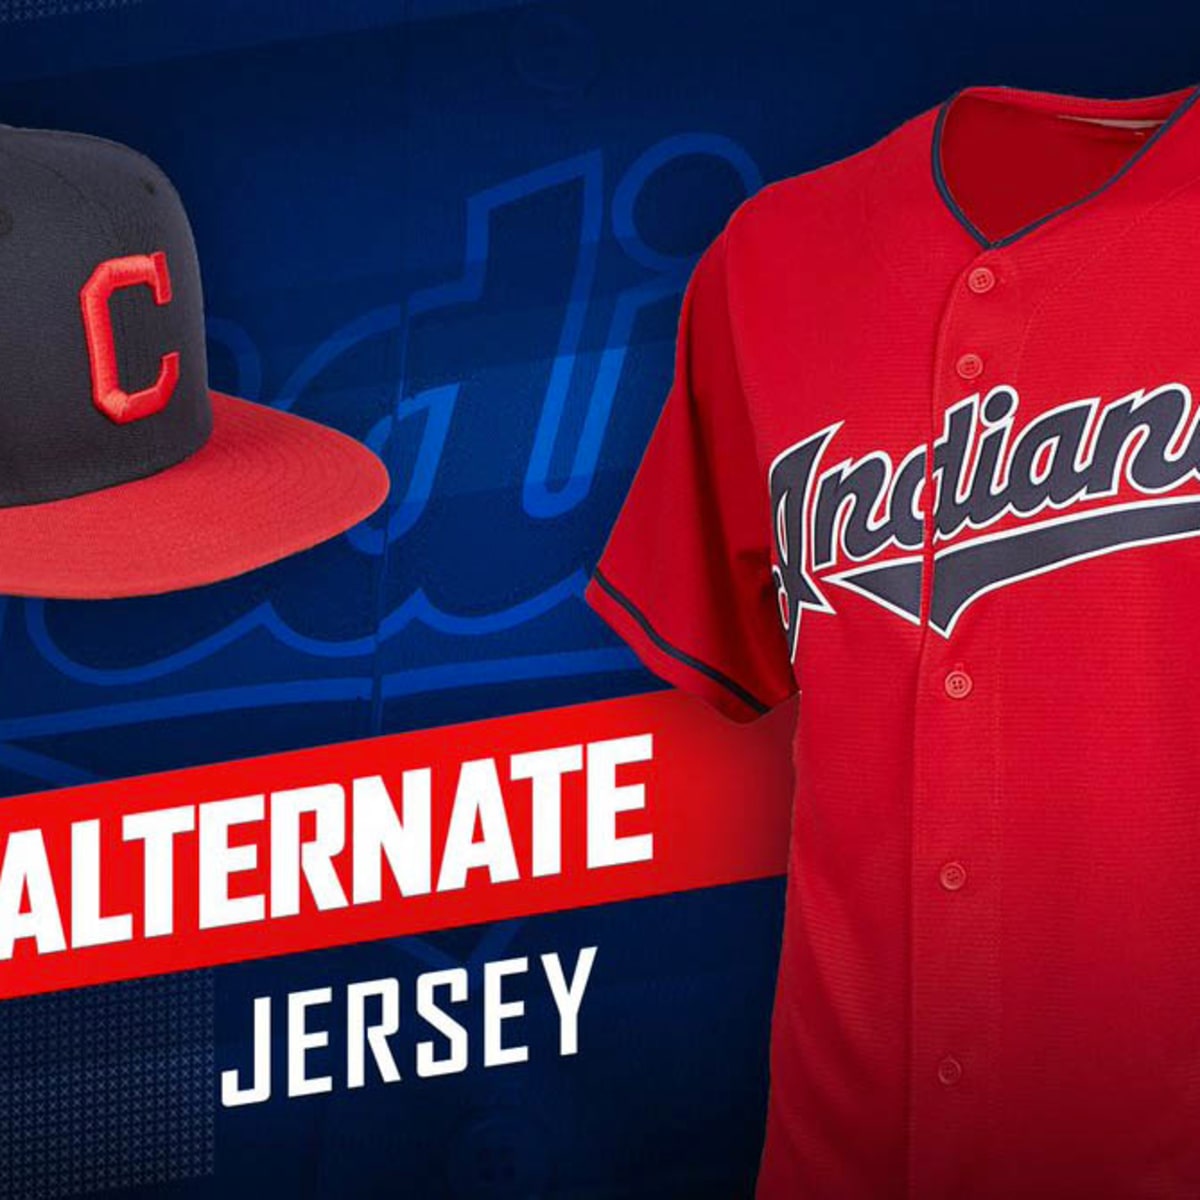 Why are the Cleveland Indians wearing light blue uniforms?